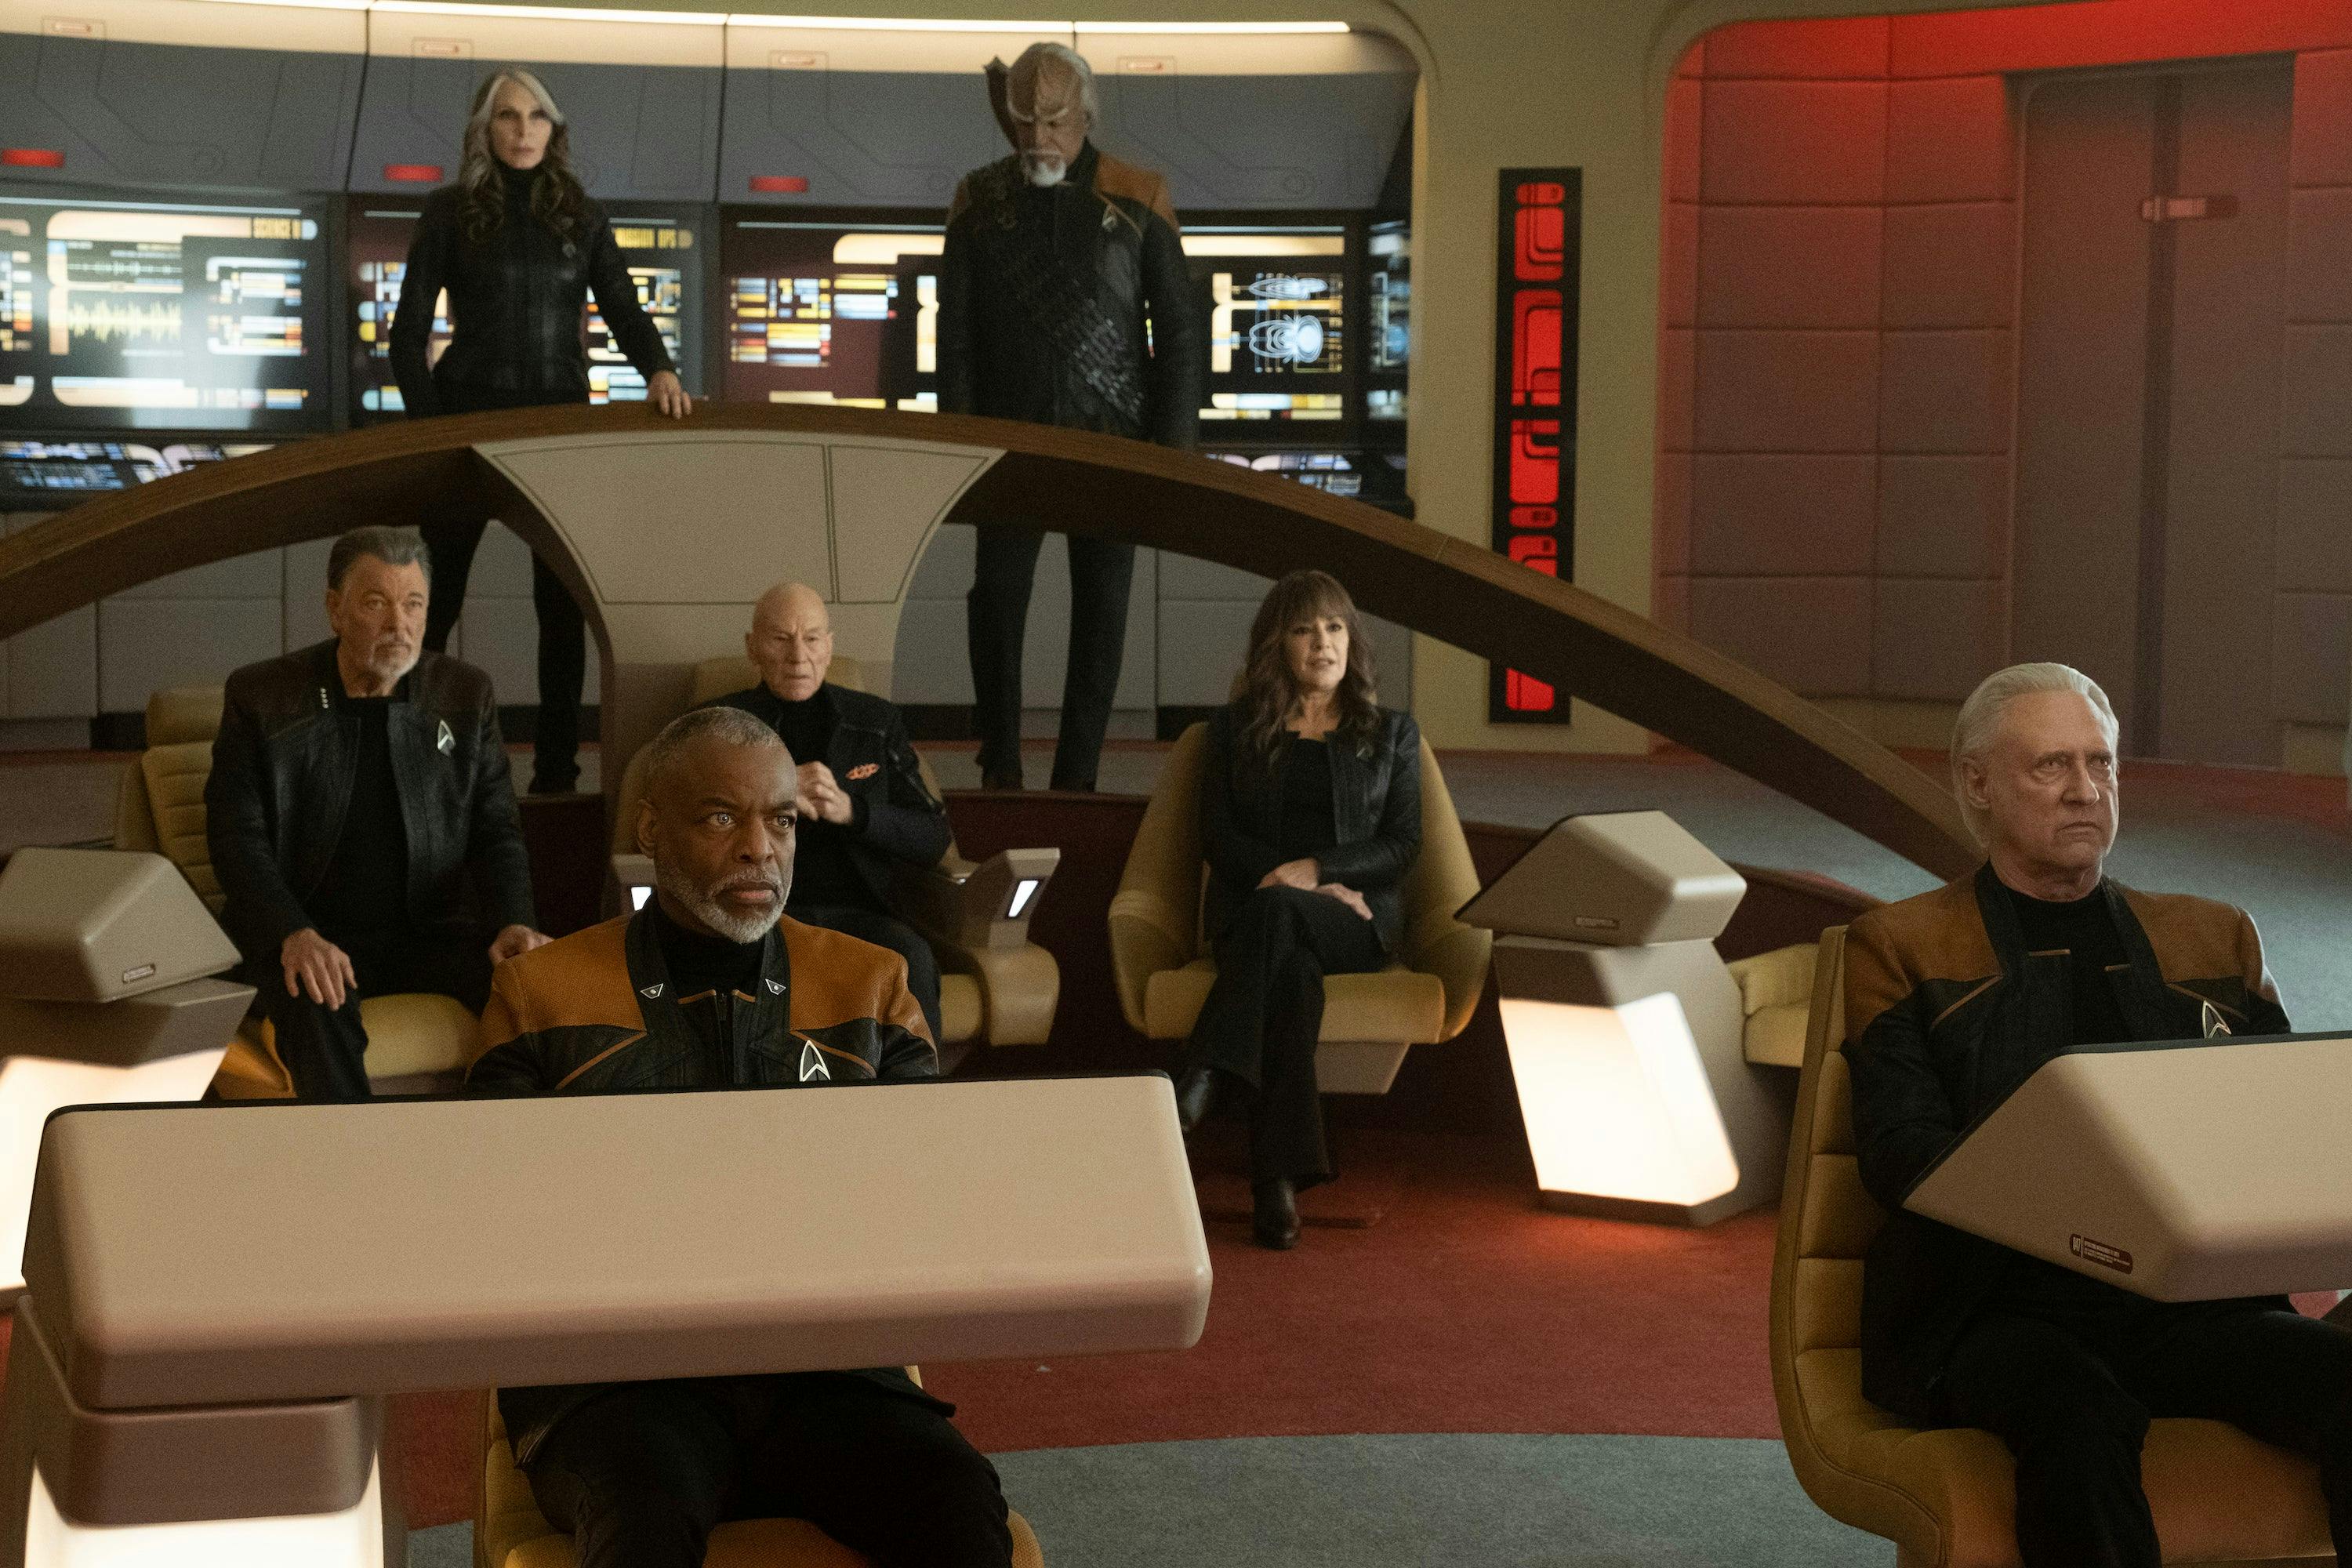 On the Enterprise-D bridge, Beverly, Worf, Riker, Picard, Deanna, Geordi, and Data look ahead at the viewscreen in 'The Last Generation'